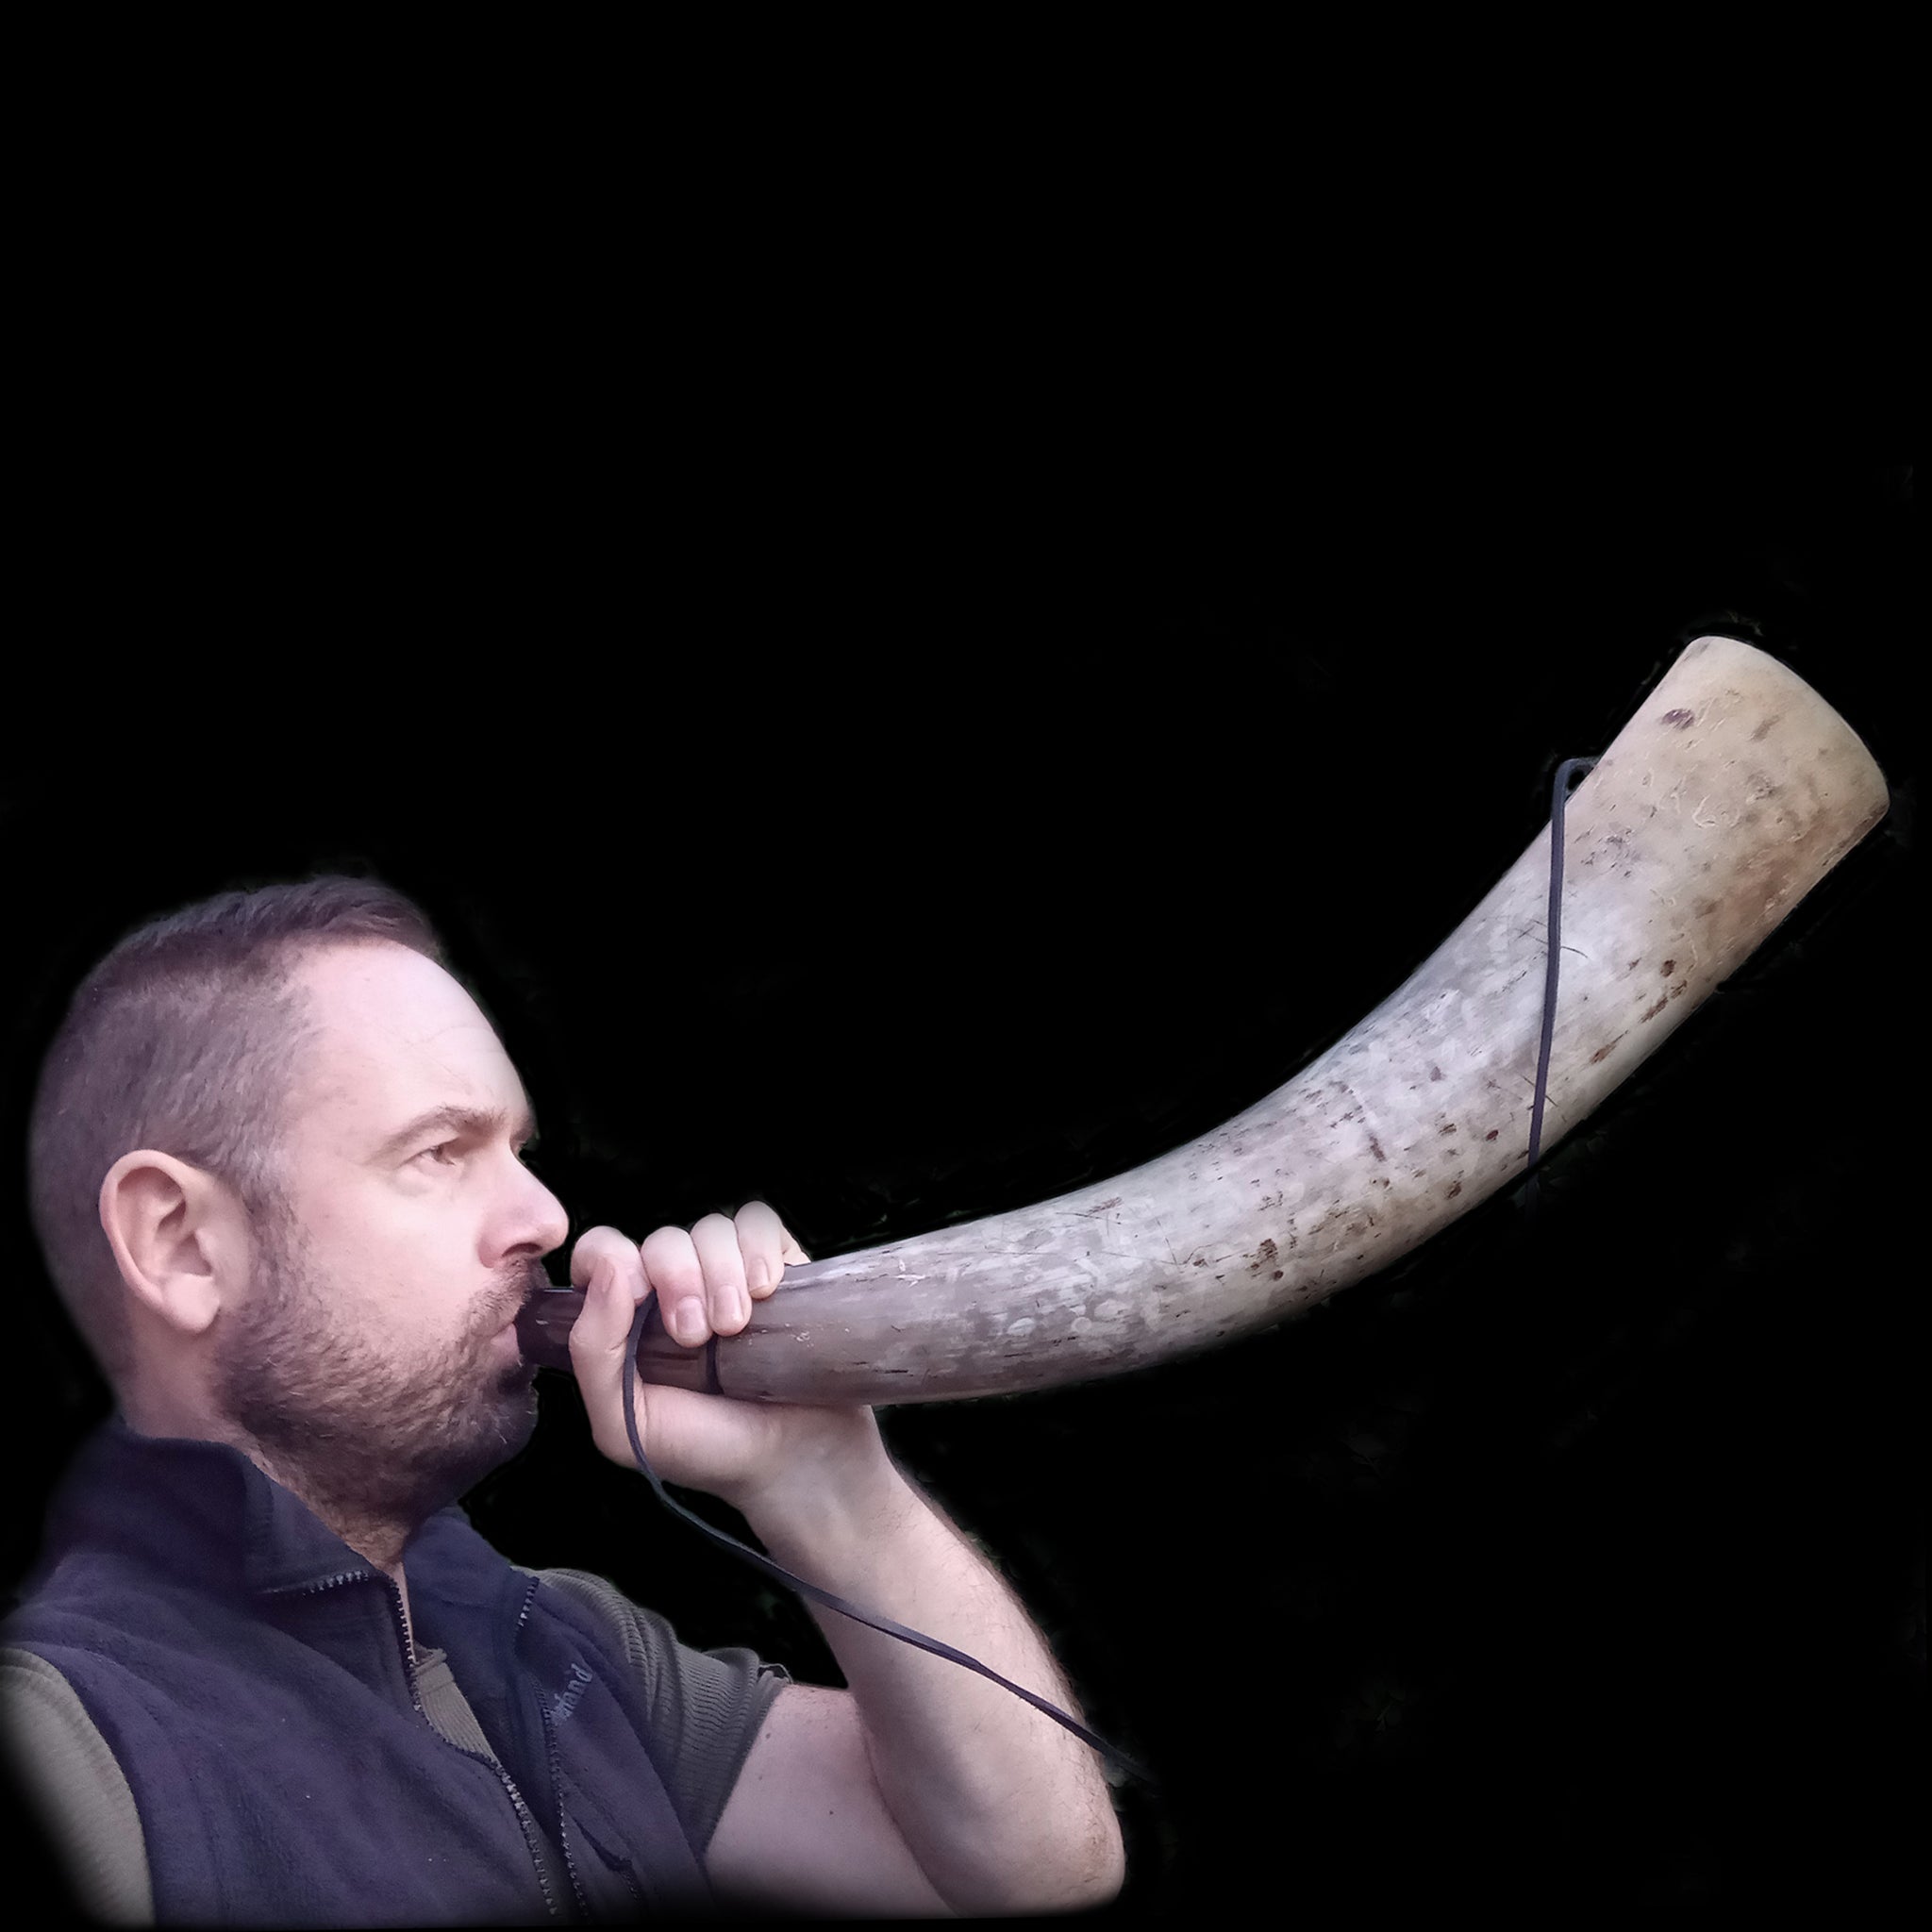 Blowing a Large Viking Blowing Horn / Bugle